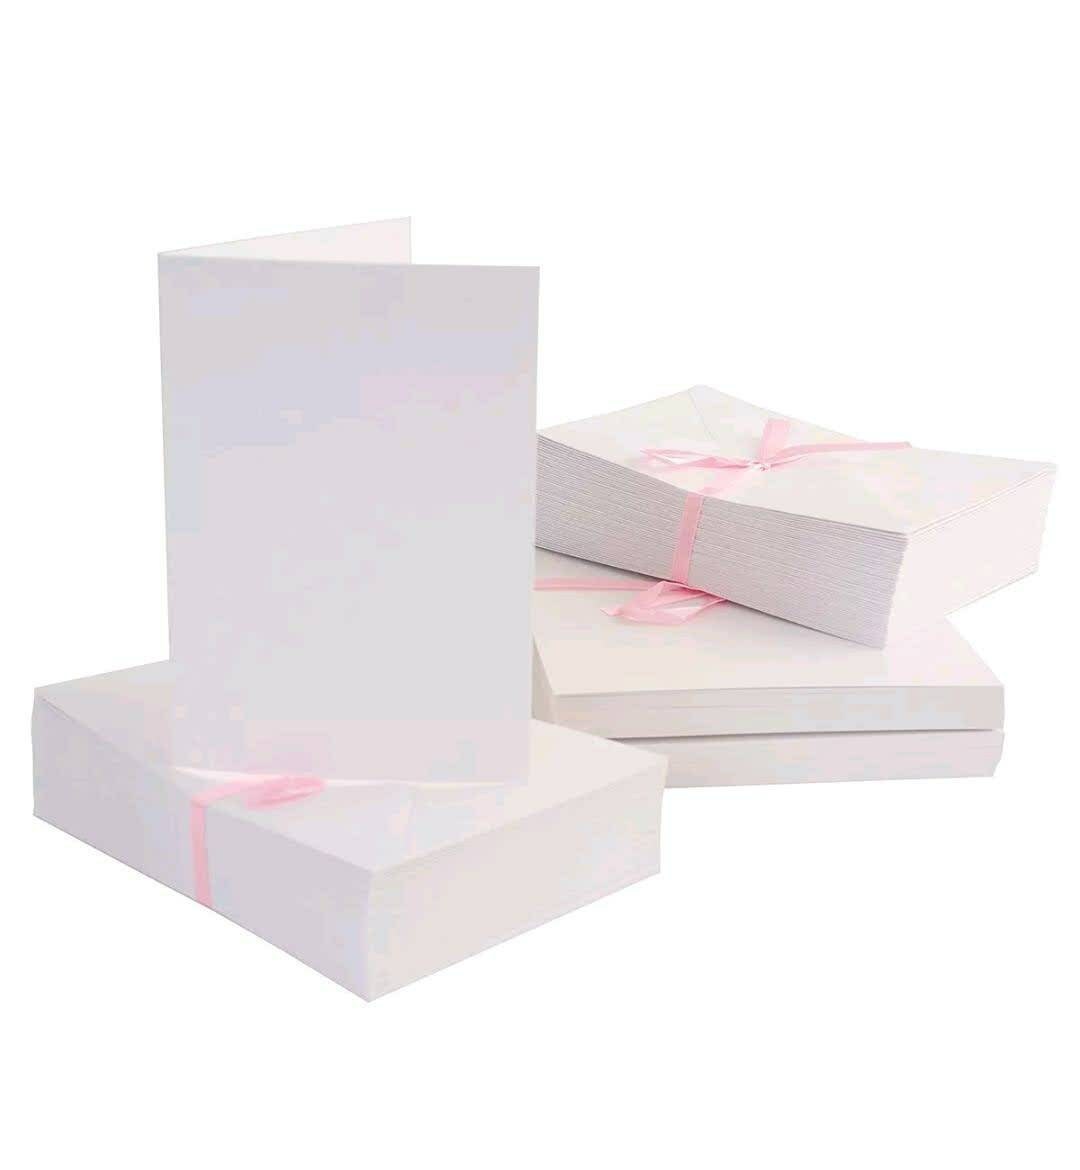 20 Cream blank note cards and envelopes, blank notes cards with envelopes,  blank stationery set of 20, 40 or 60 cards and envelopes